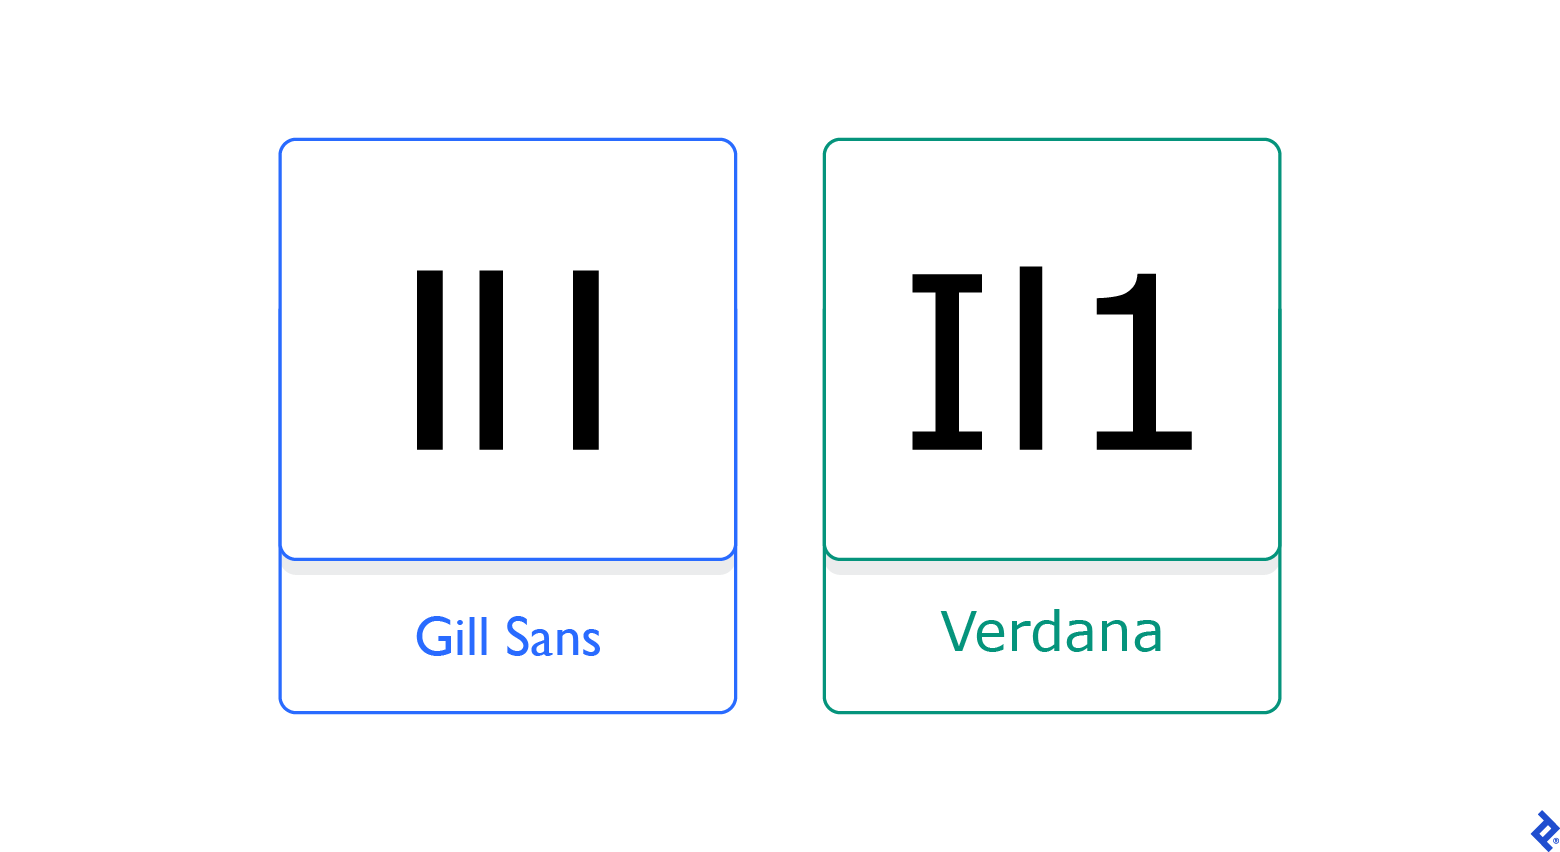 The letters “I,” “L,” and “1” are compared in Verdana, where they’re distinguishable, and in Gill Sans, where they are not.